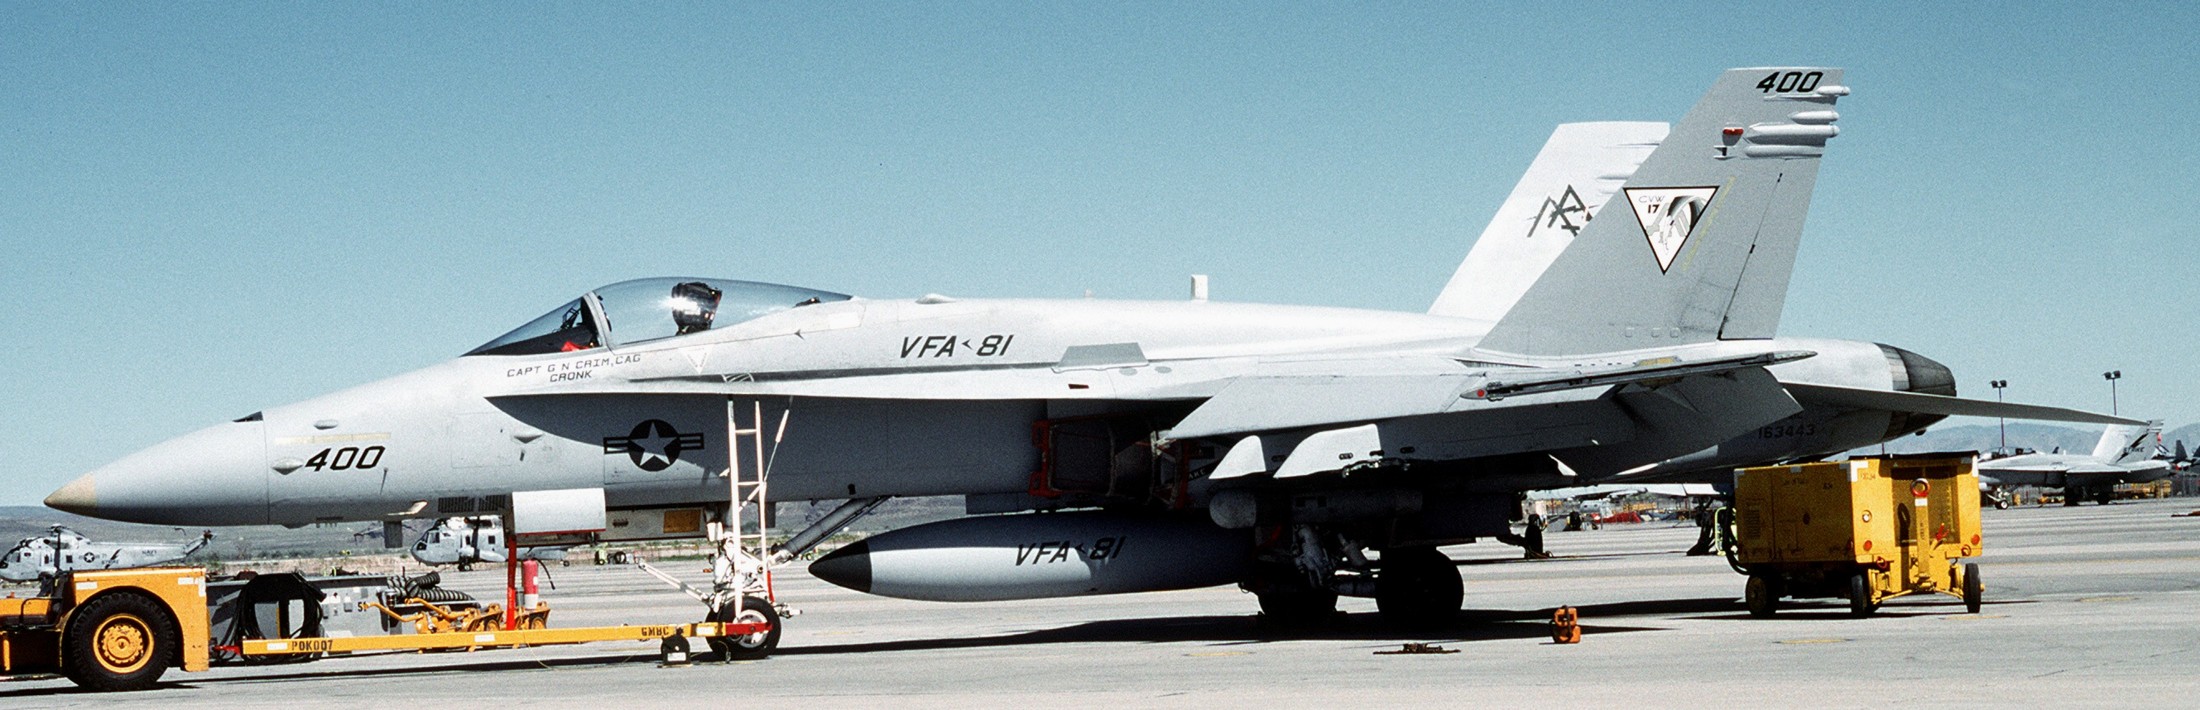 vfa-81 sunliners strike fighter squadron f/a-18c hornet cvw-17 118 nas fallon nevada